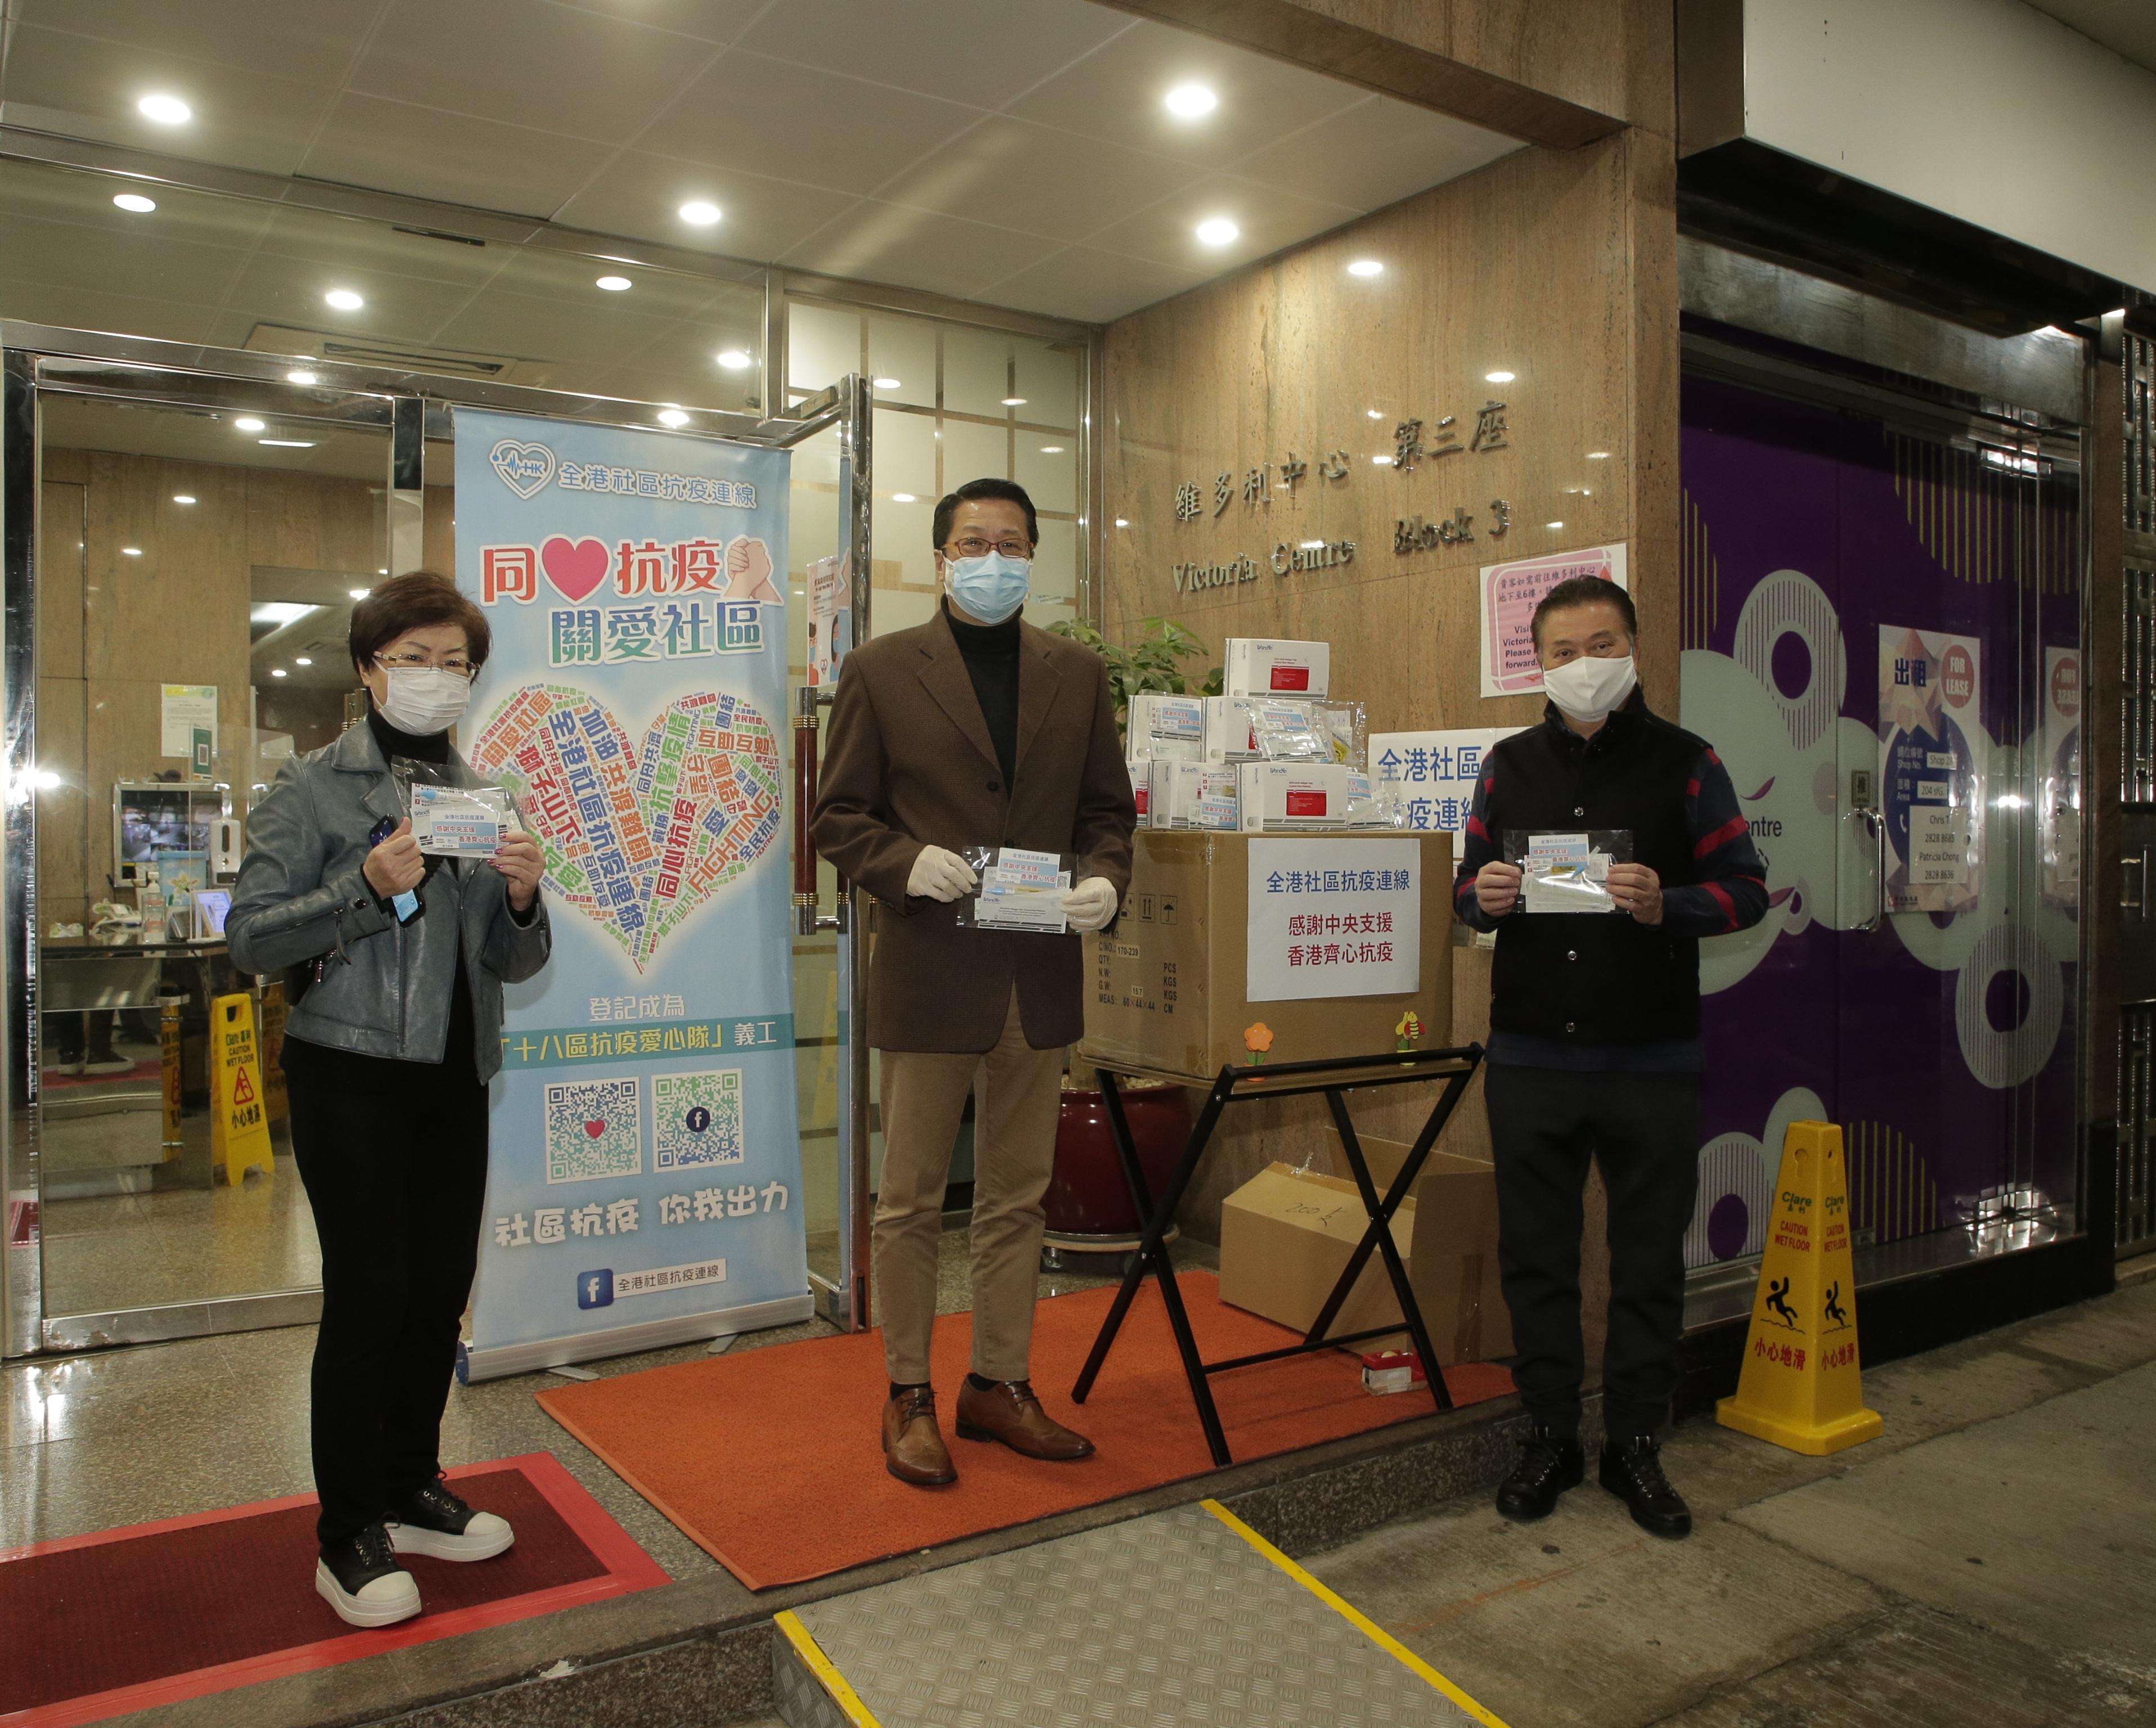 The Acting Secretary for Home Affairs, Mr Jack Chan, today (February 26) joined major organisations separately to distribute anti-epidemic supplies in several districts. Photo shows Mr Chan (centre) and the chief convenor of the Hong Kong Community Anti-Coronavirus Link, Dr Bunny Chan (right) distributing rapid antigen test kits at Victoria Centre in Tin Hau.
